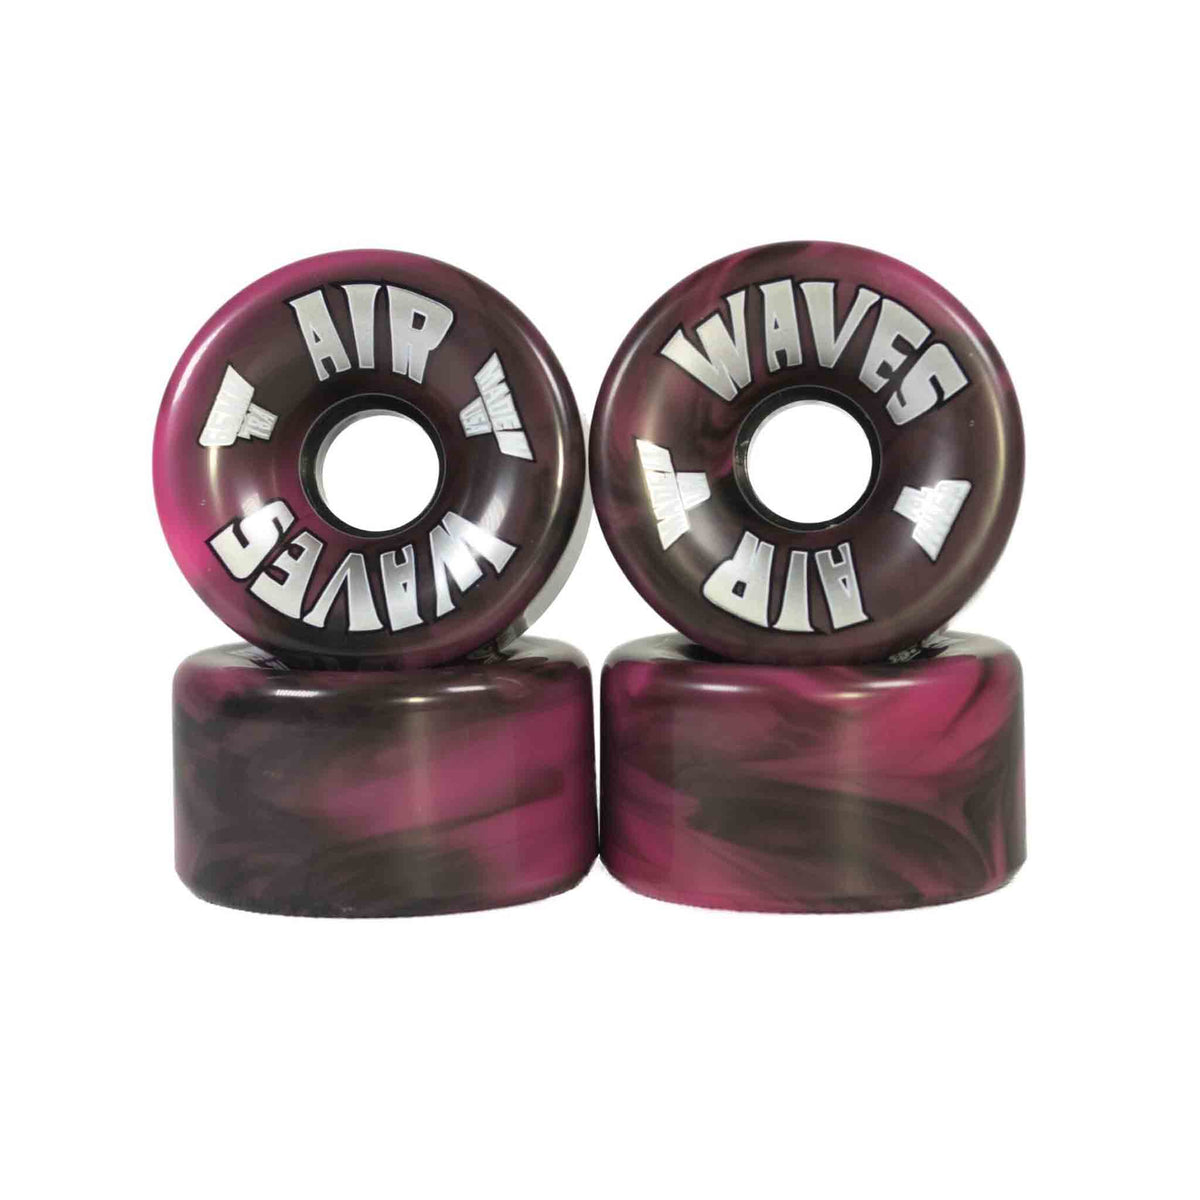 Air Waves USA Wheels 65mm 78A - Set of 8 - Roller Skates Parts and Accessories | JT Skate